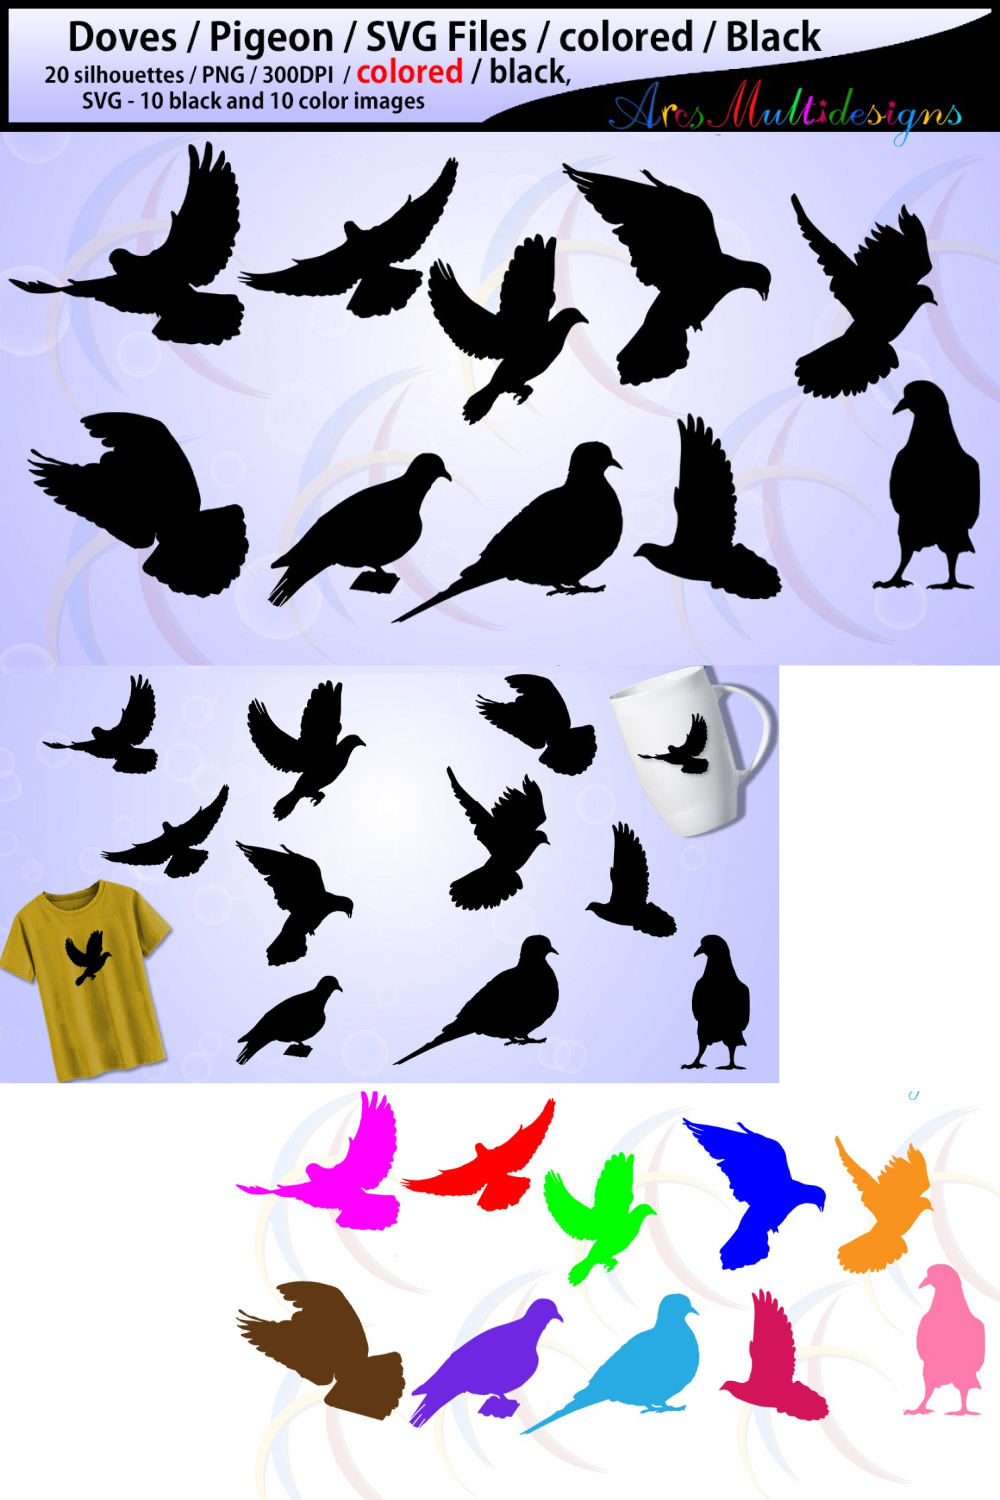 Pigeon silhouette doves pigeon printable of pinterest.